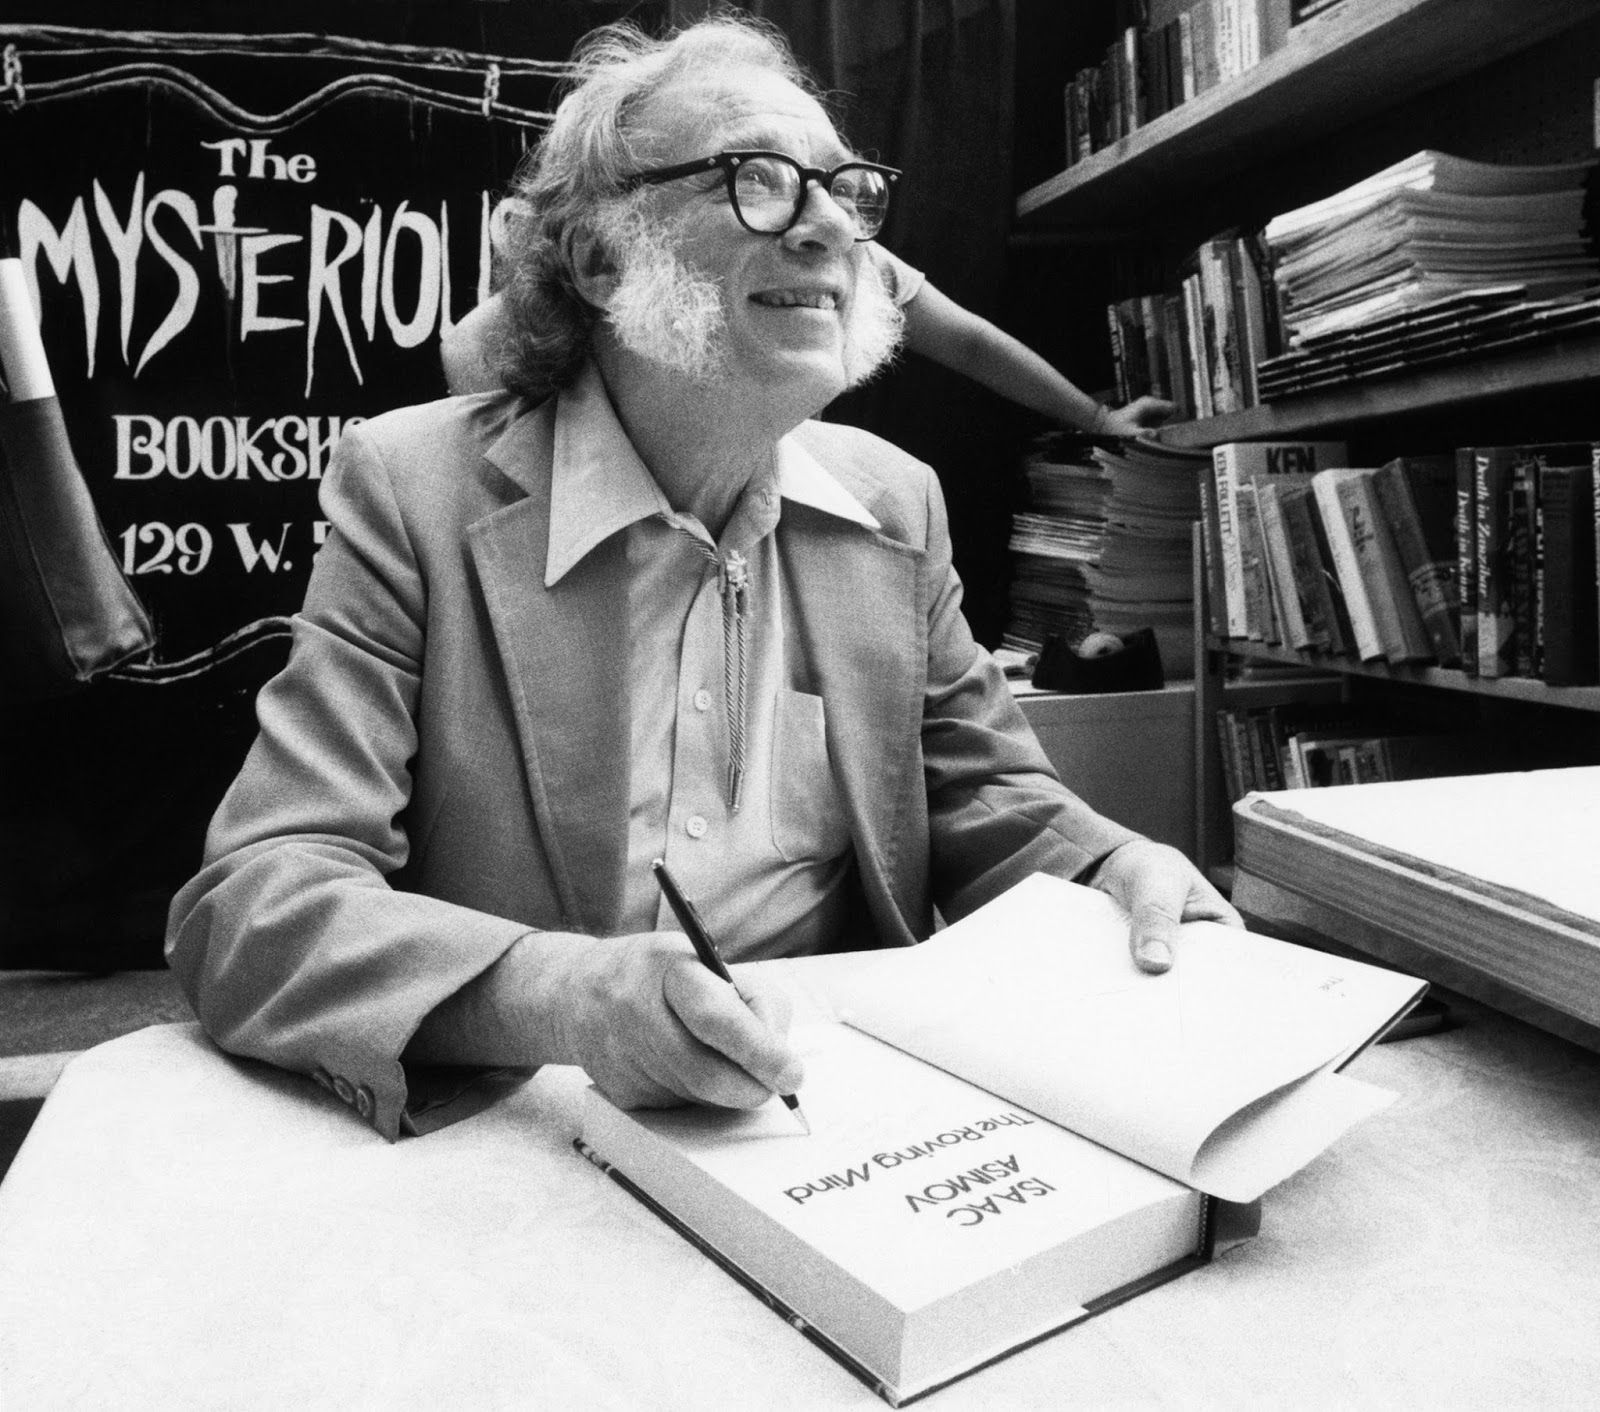 Isaac Asimov writes almost 500 books in his lifetime (here)